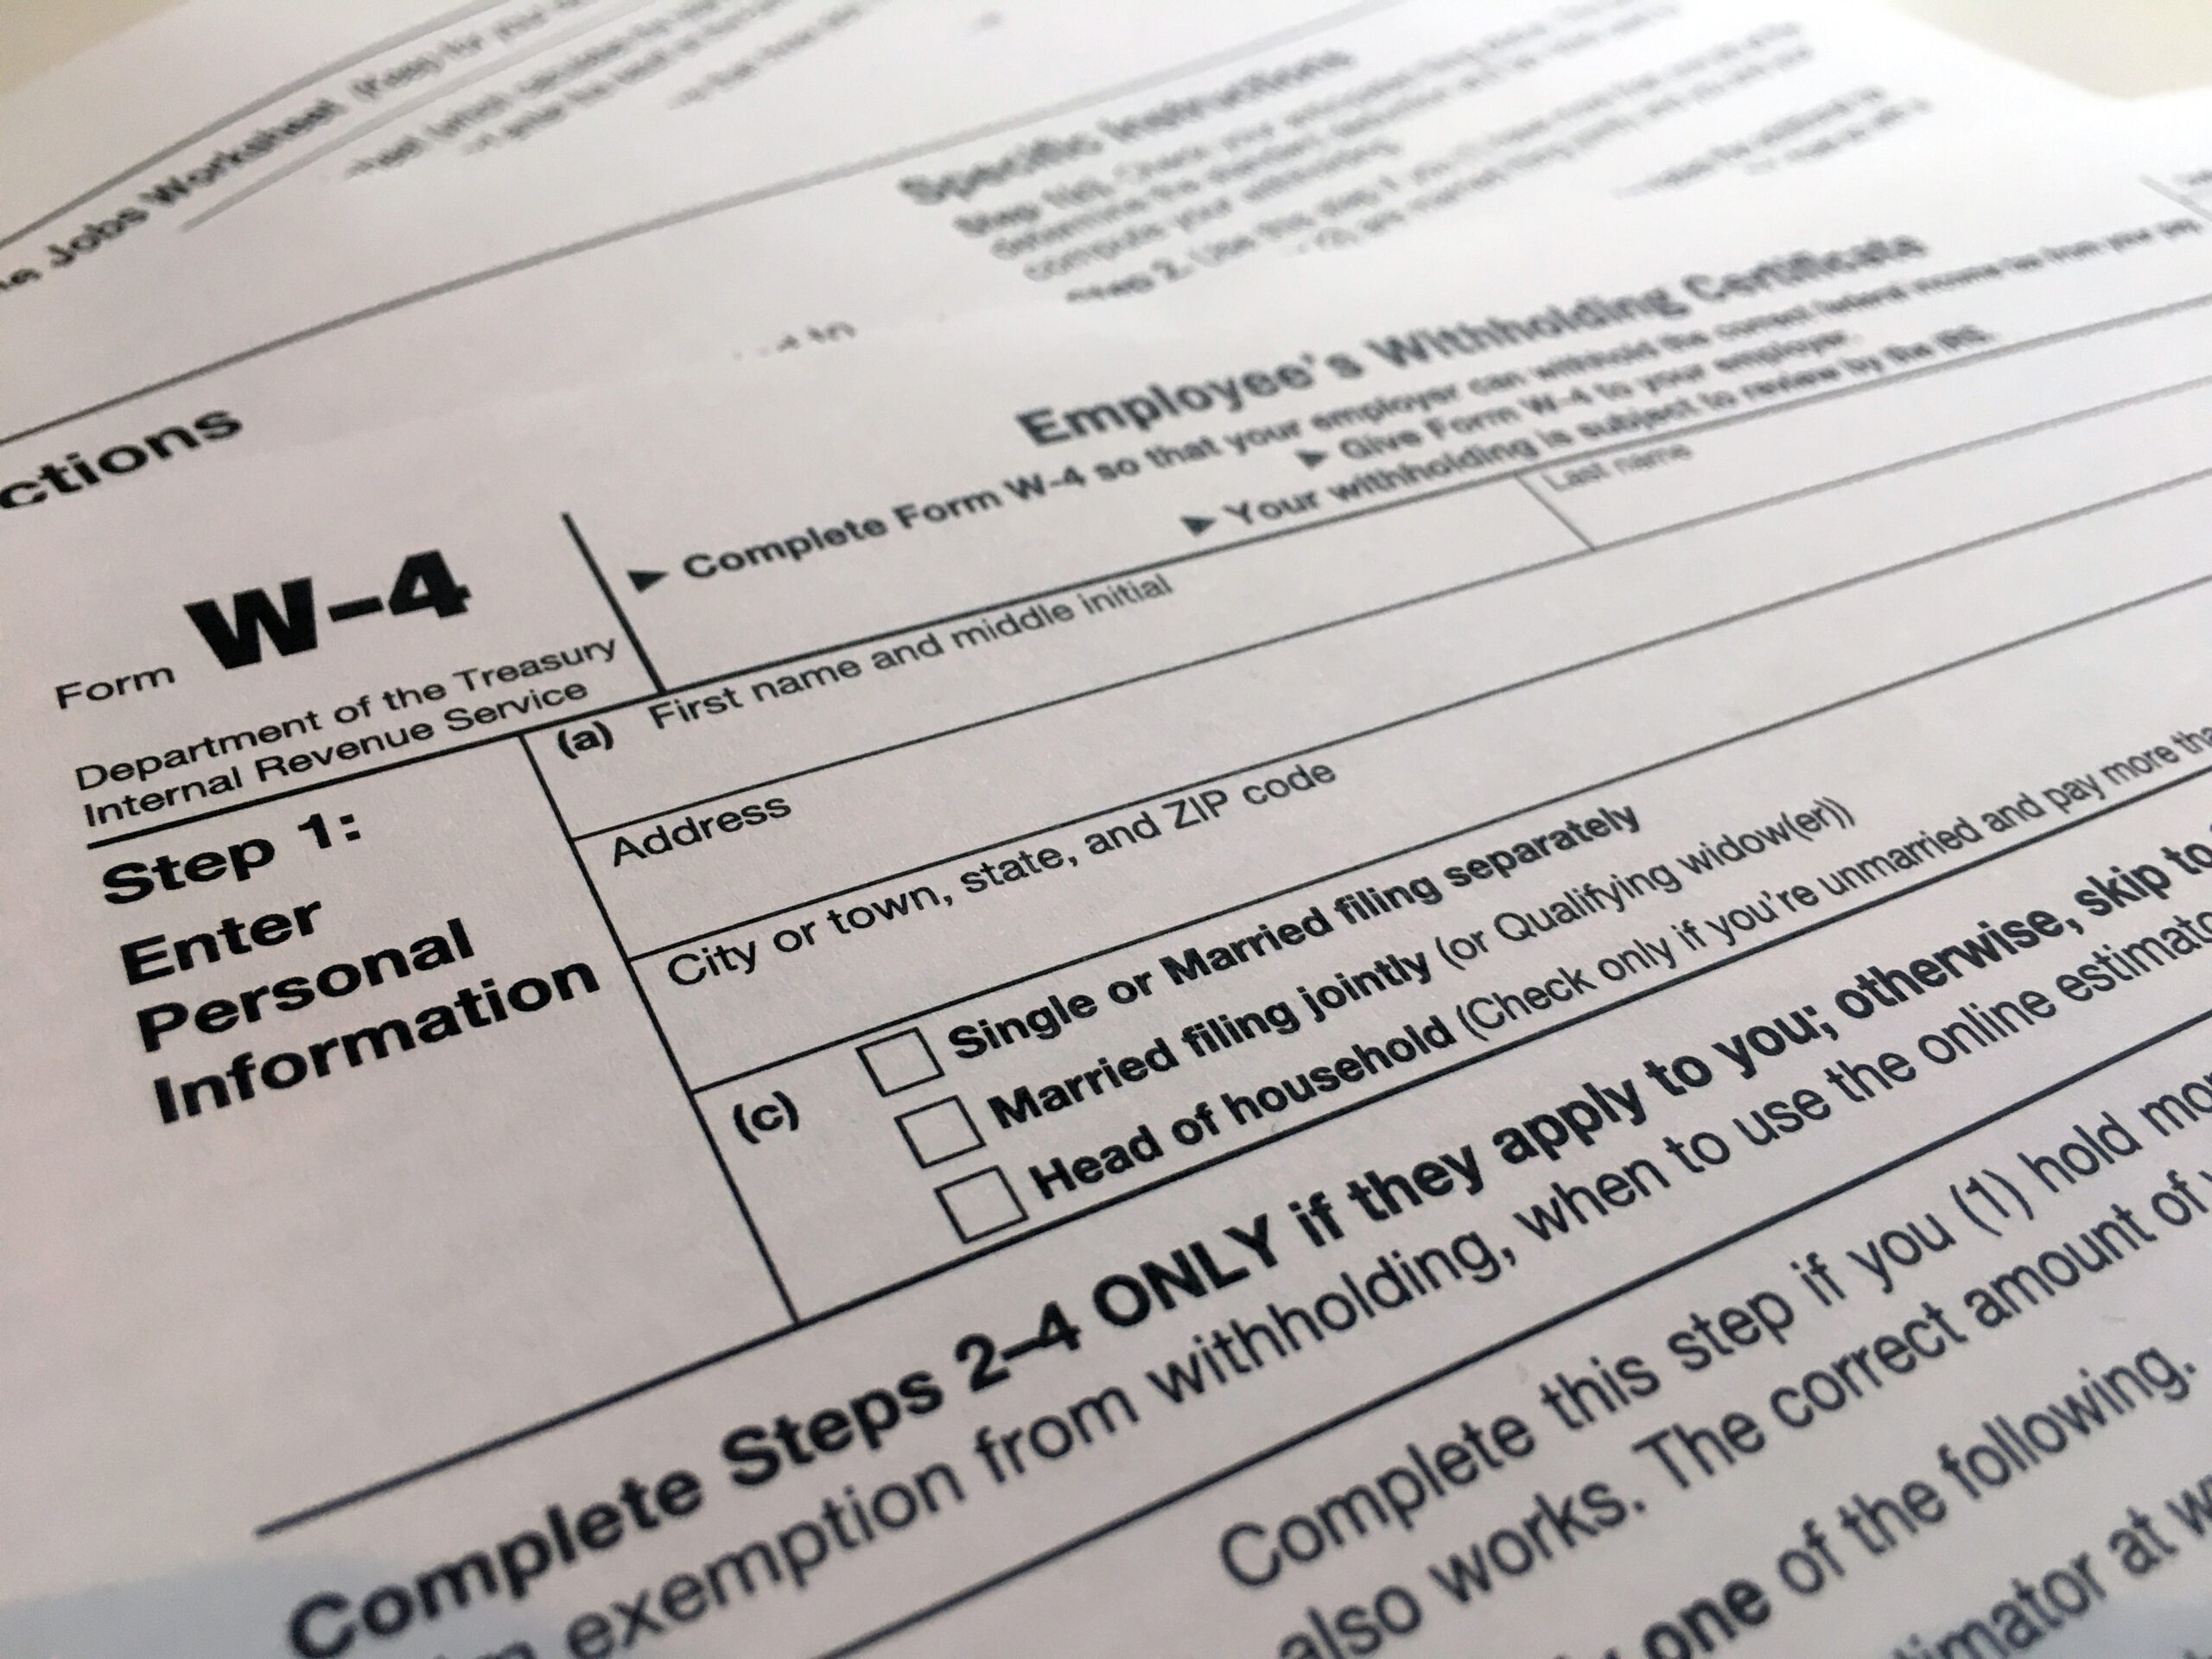 FILE - In this Feb. 5, 2020, file photo, a W-4 form is viewed in New York. The IRS will delay the traditional April 15 tax filing due date until May 17, 2021, to cope with added duties and provide Americans more flexibility. (AP Photo/Patrick Sison, File)